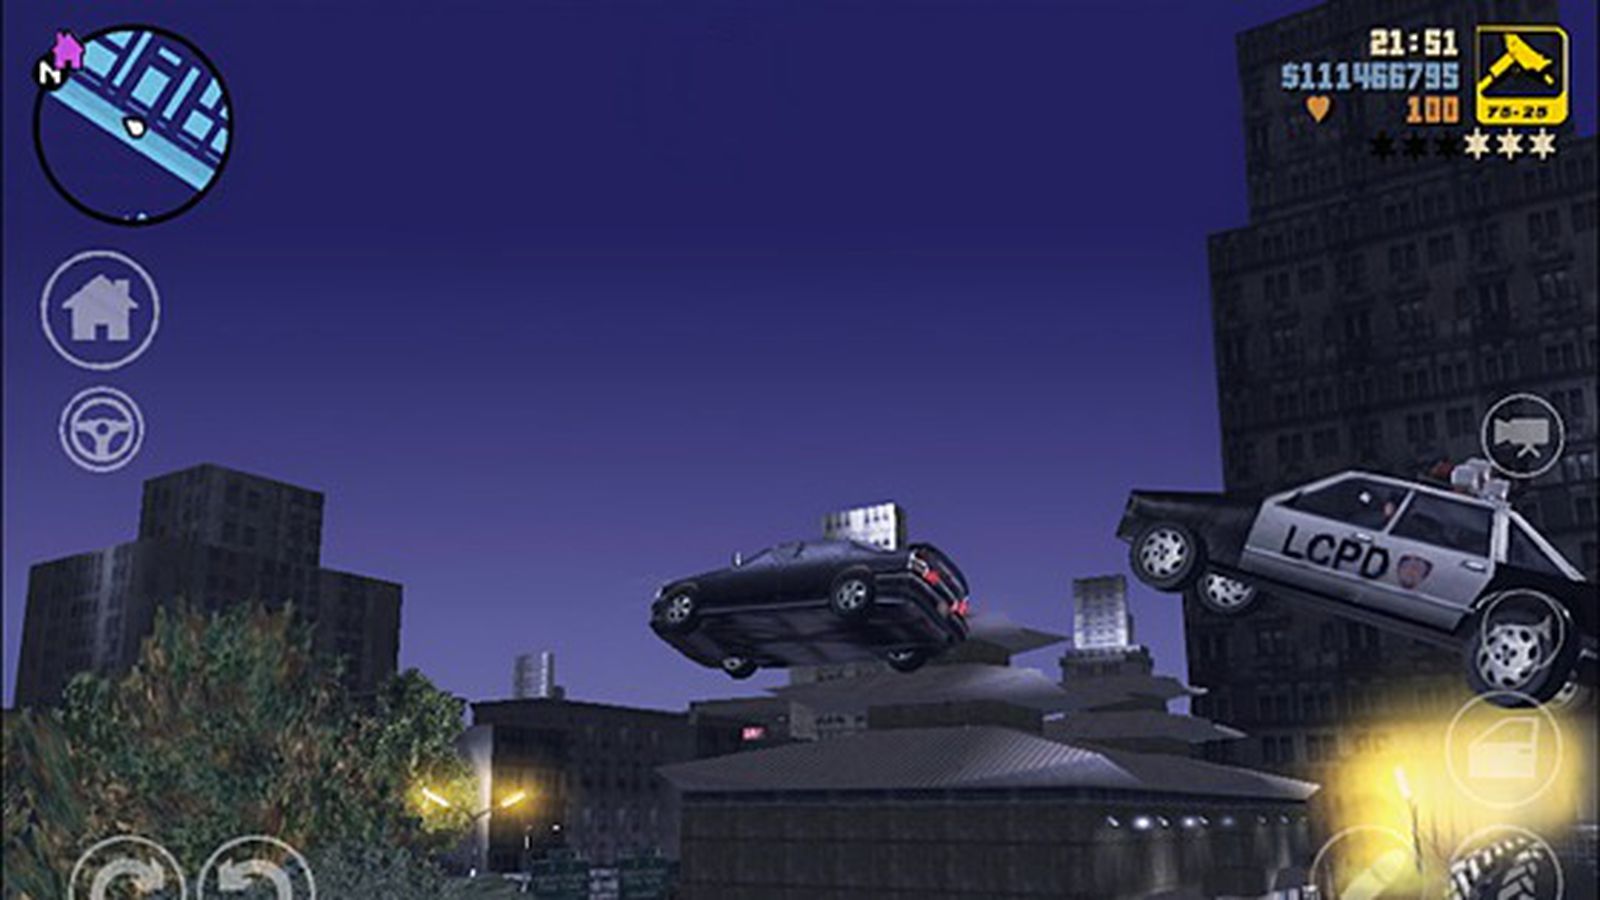 Grand Theft Auto III: 10 Year Anniversary Edition Box Shot for Android -  GameFAQs